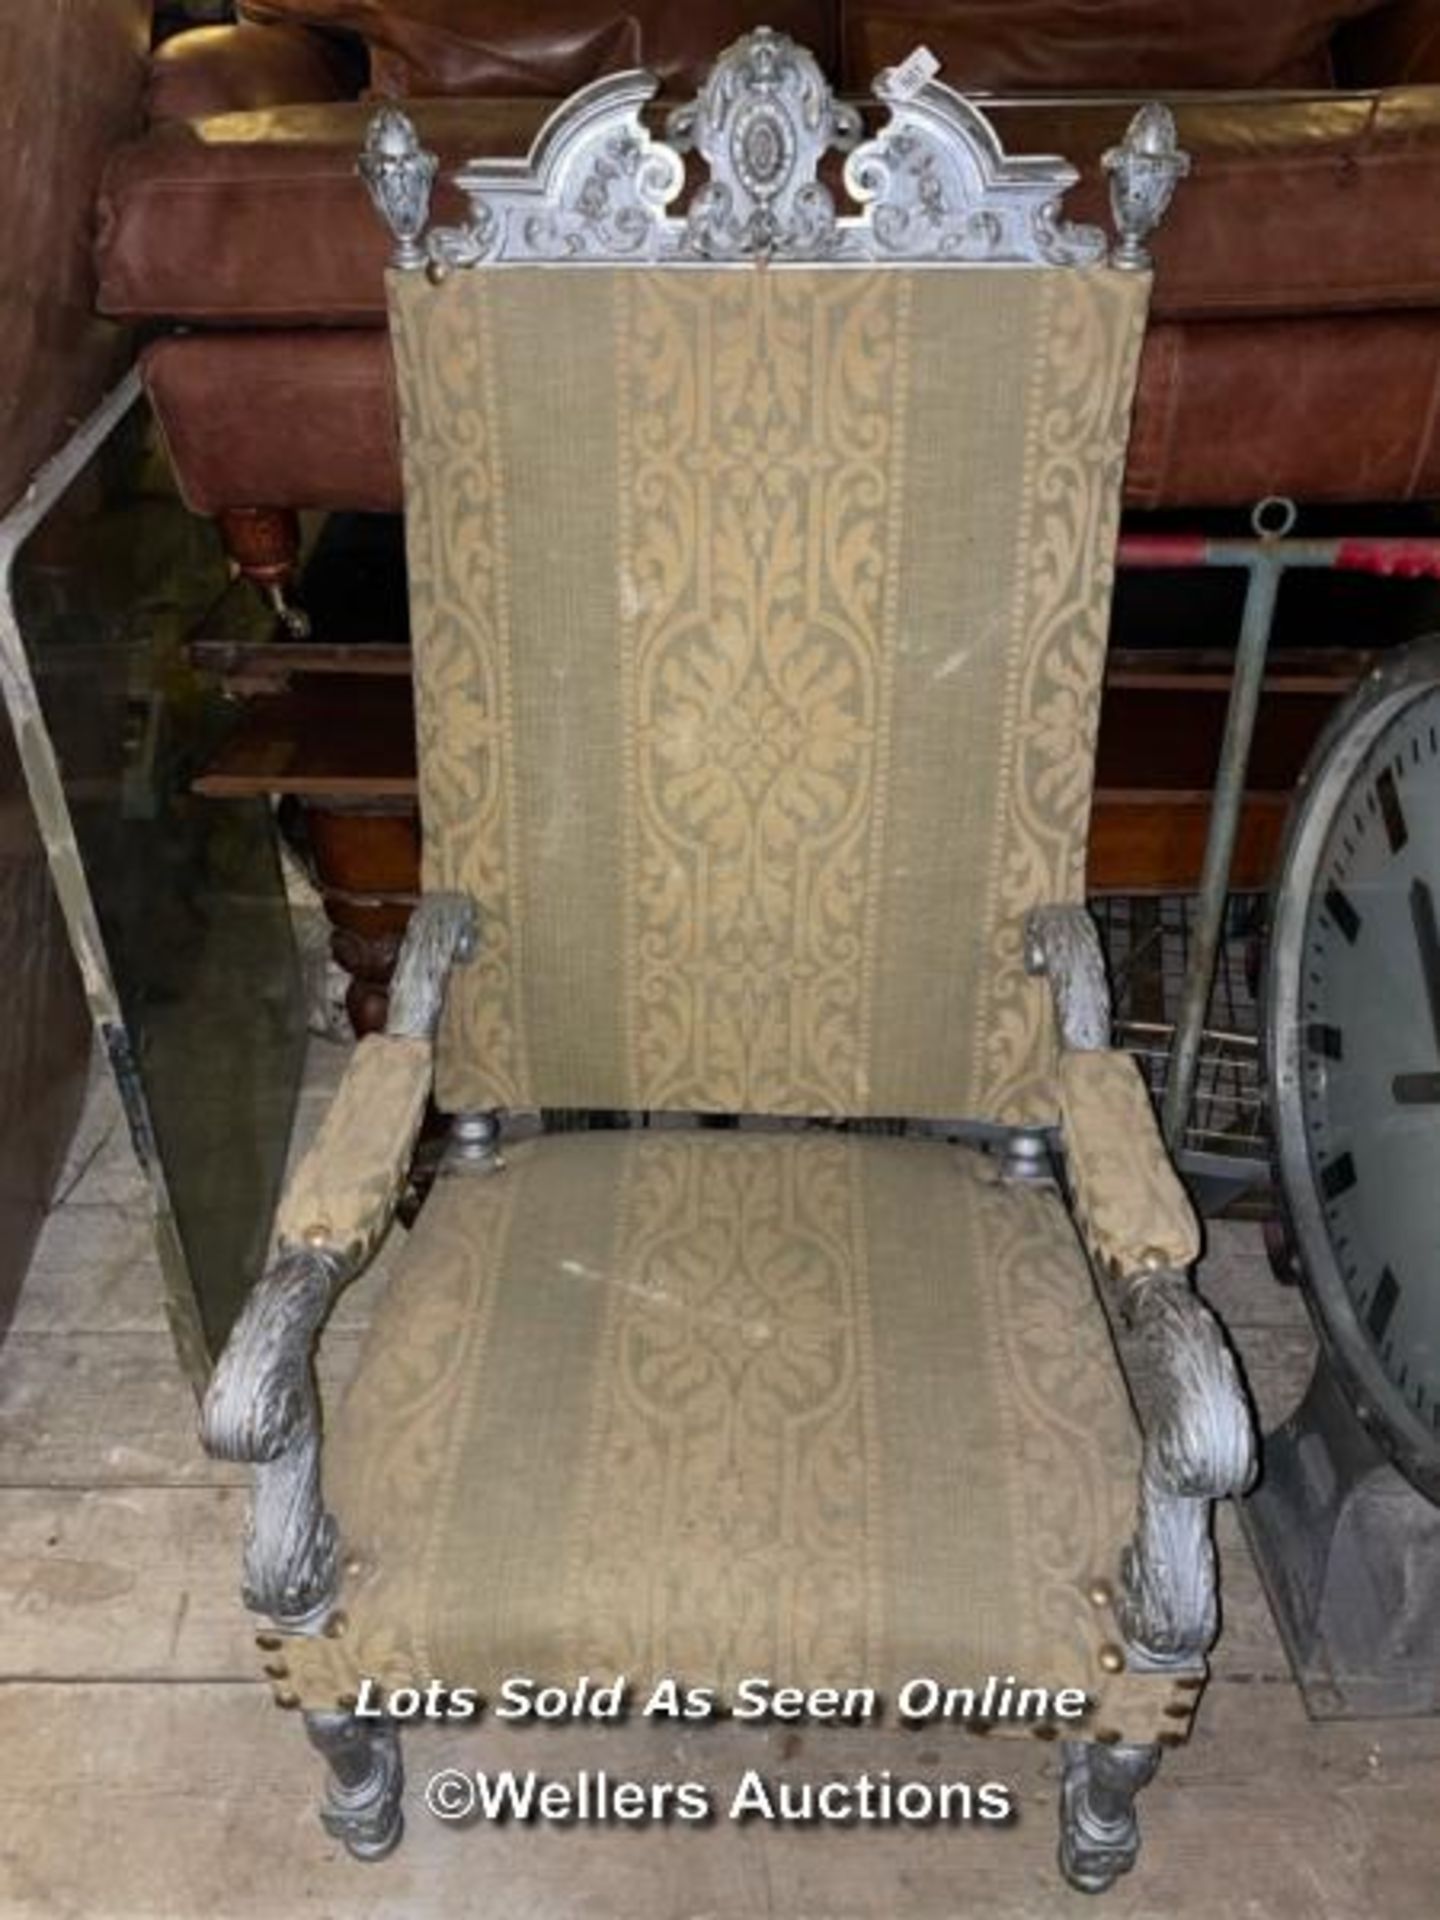 RENAISSANCE REVIVAL THRONE CHAIR WITH SILVERED PAINT FINISH, 71 X 56 X 140CM - Image 4 of 4